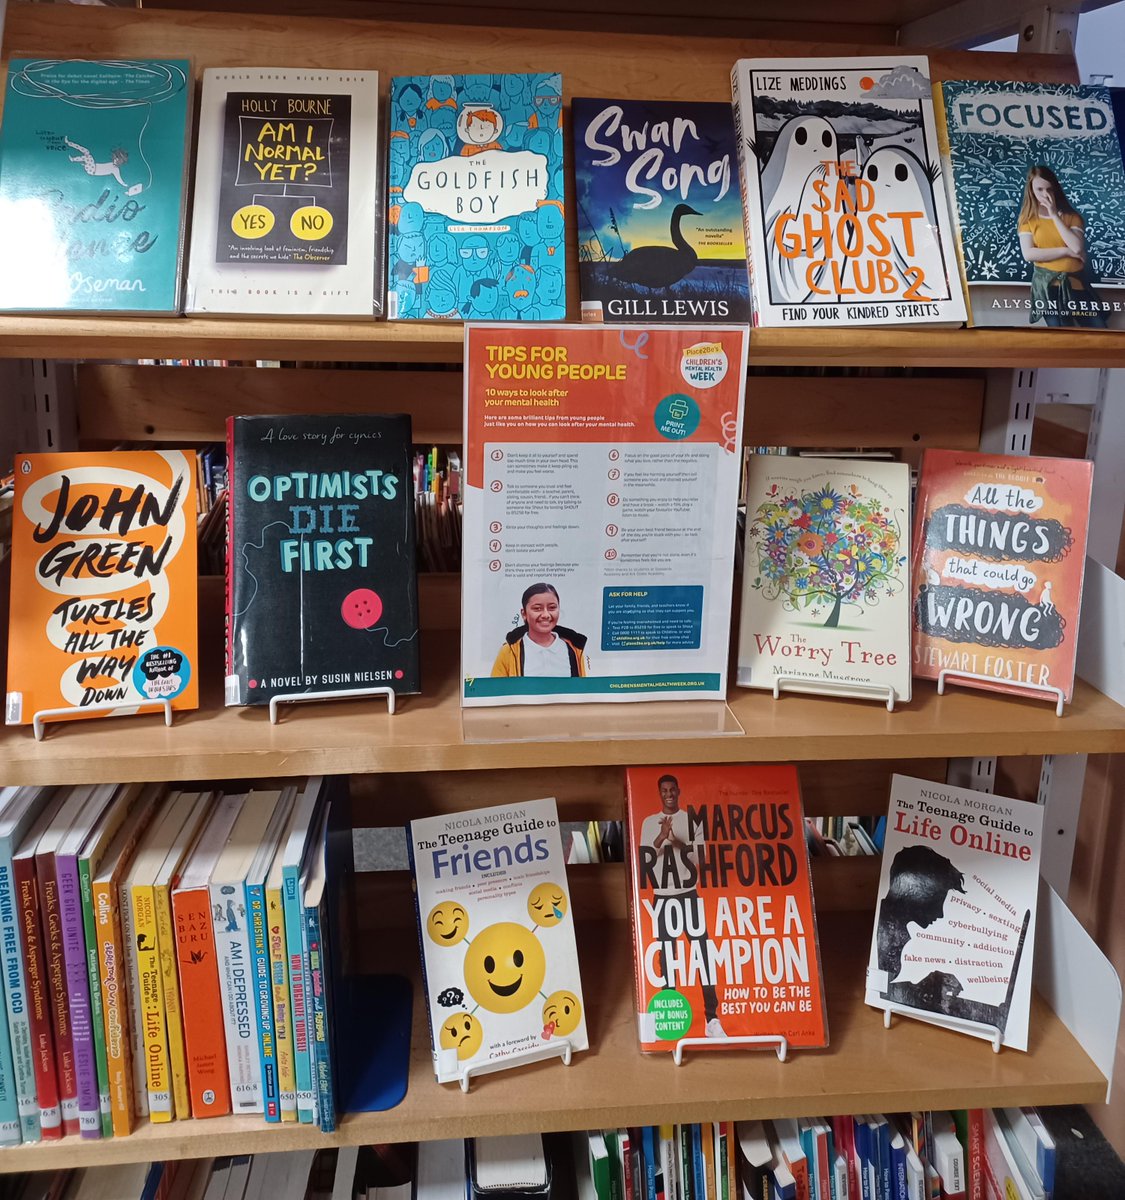 Reading for just 10 minutes a day has been proven to have a really positive impact on your mental health. So, why not give it a go during #ChildrensMentalHealthWeek? Any book of your choice will do, or pick up some extra #ShelfHelp from our wellbeing display.